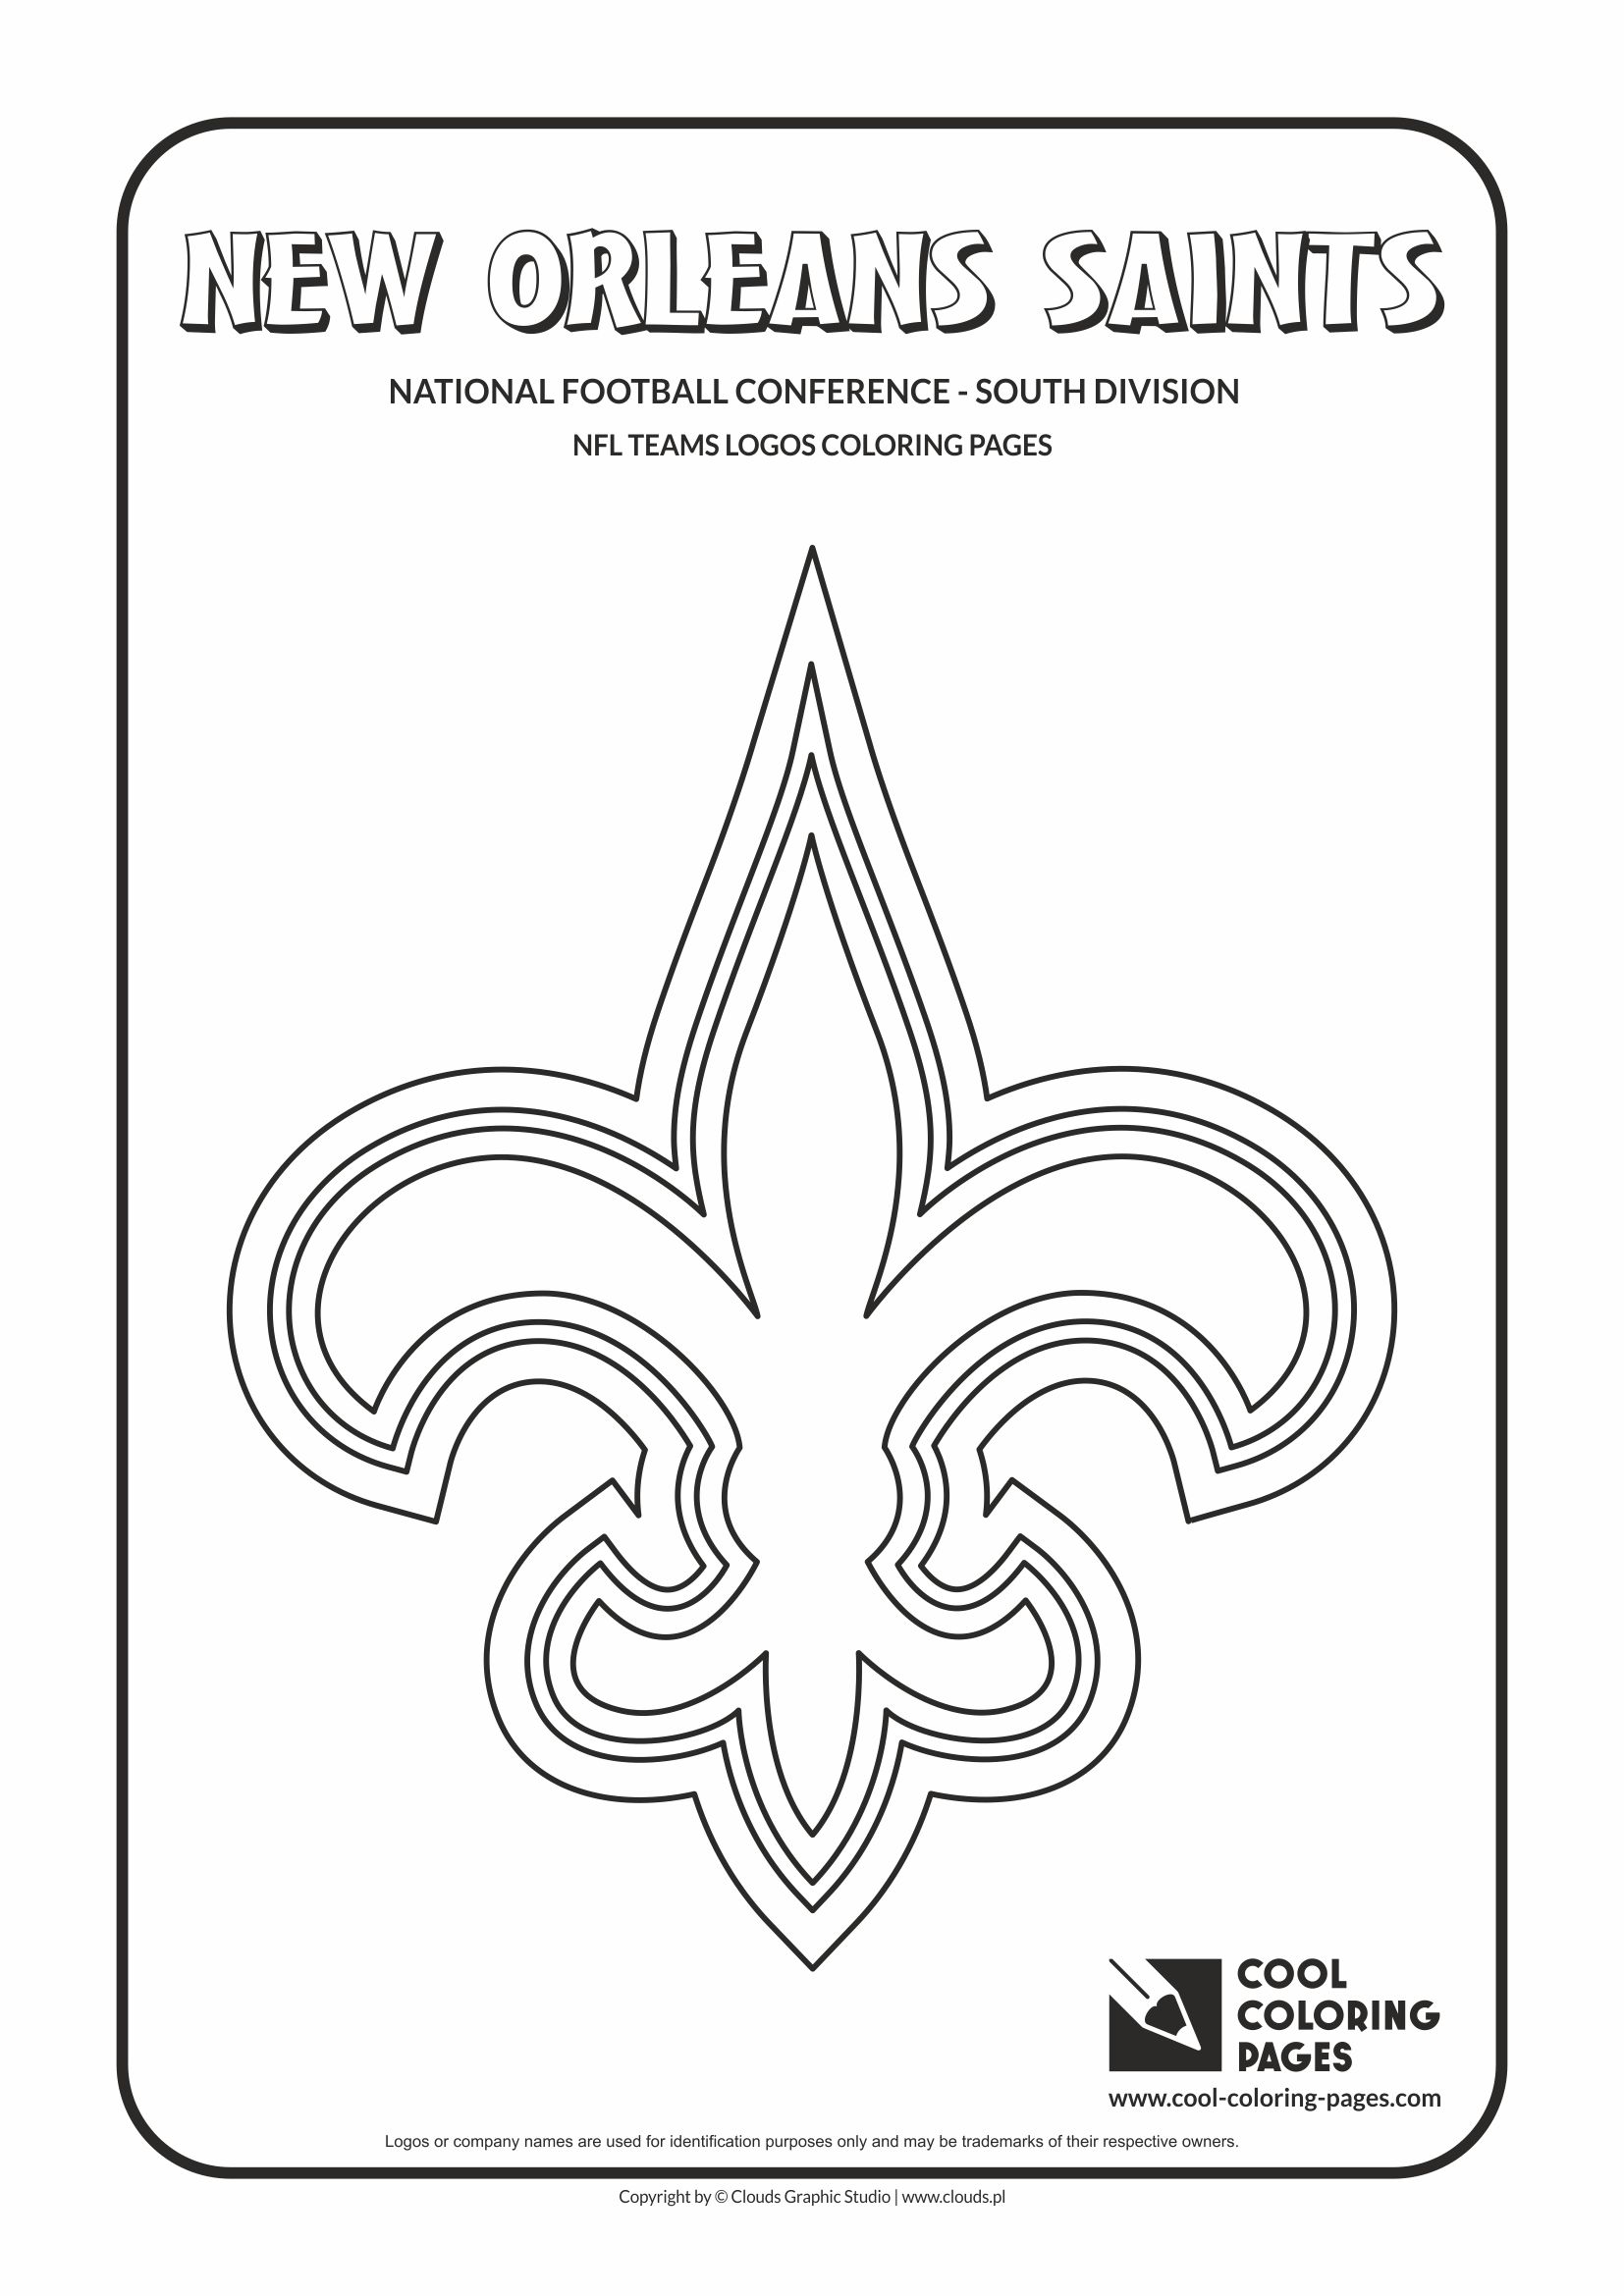 Cool Coloring Pages - NFL American Football Clubs Logos - National Football Conference - South Division / New Orleans Saints logo / Coloring page with New Orleans Saints logo